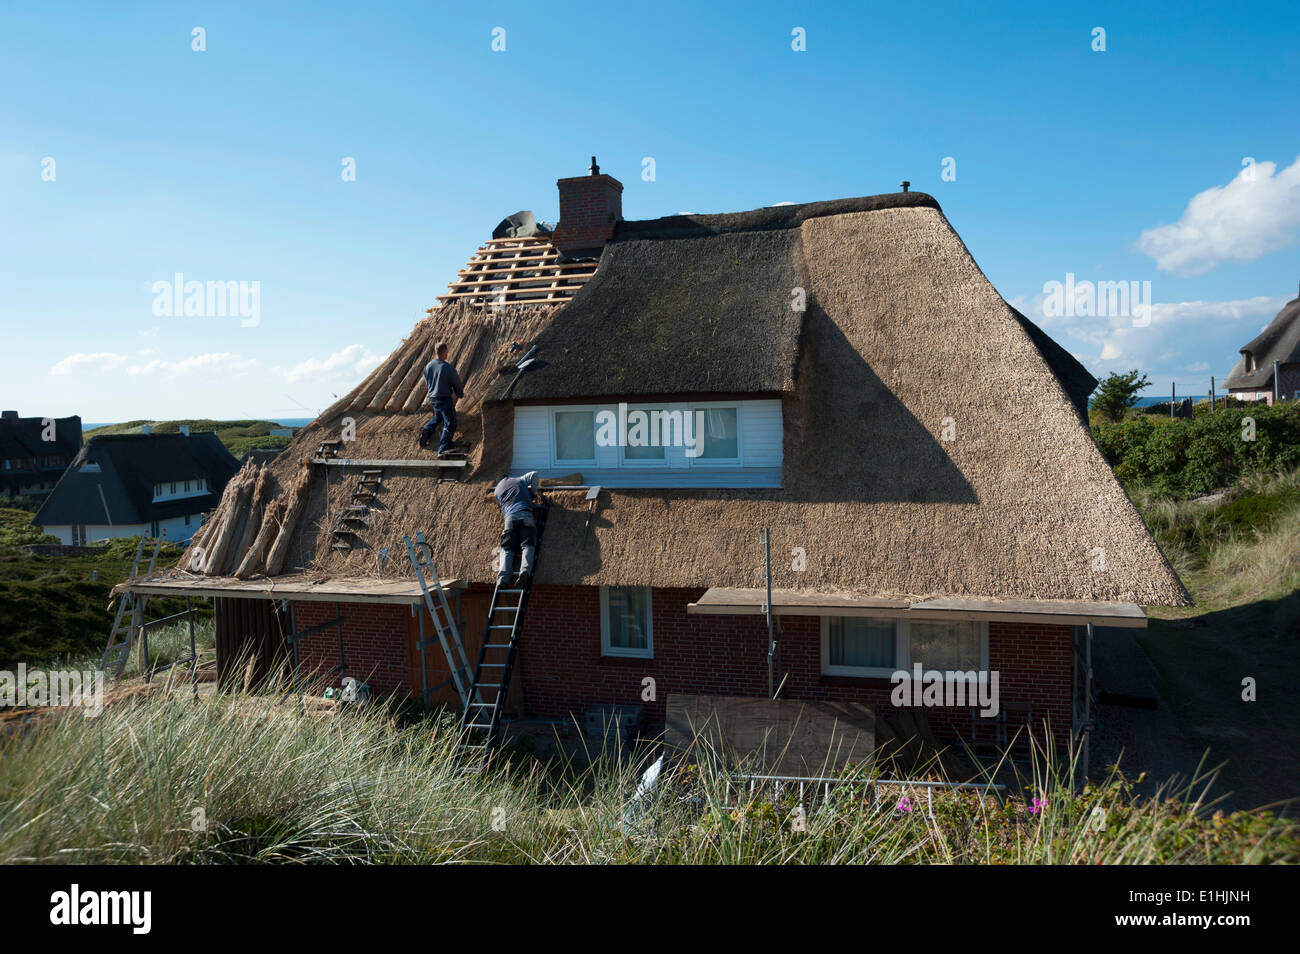 Roofers renovating a thatched roof, Rantum, Sylt, North Frisia, Schleswig-Holstein, Germany Stock Photo